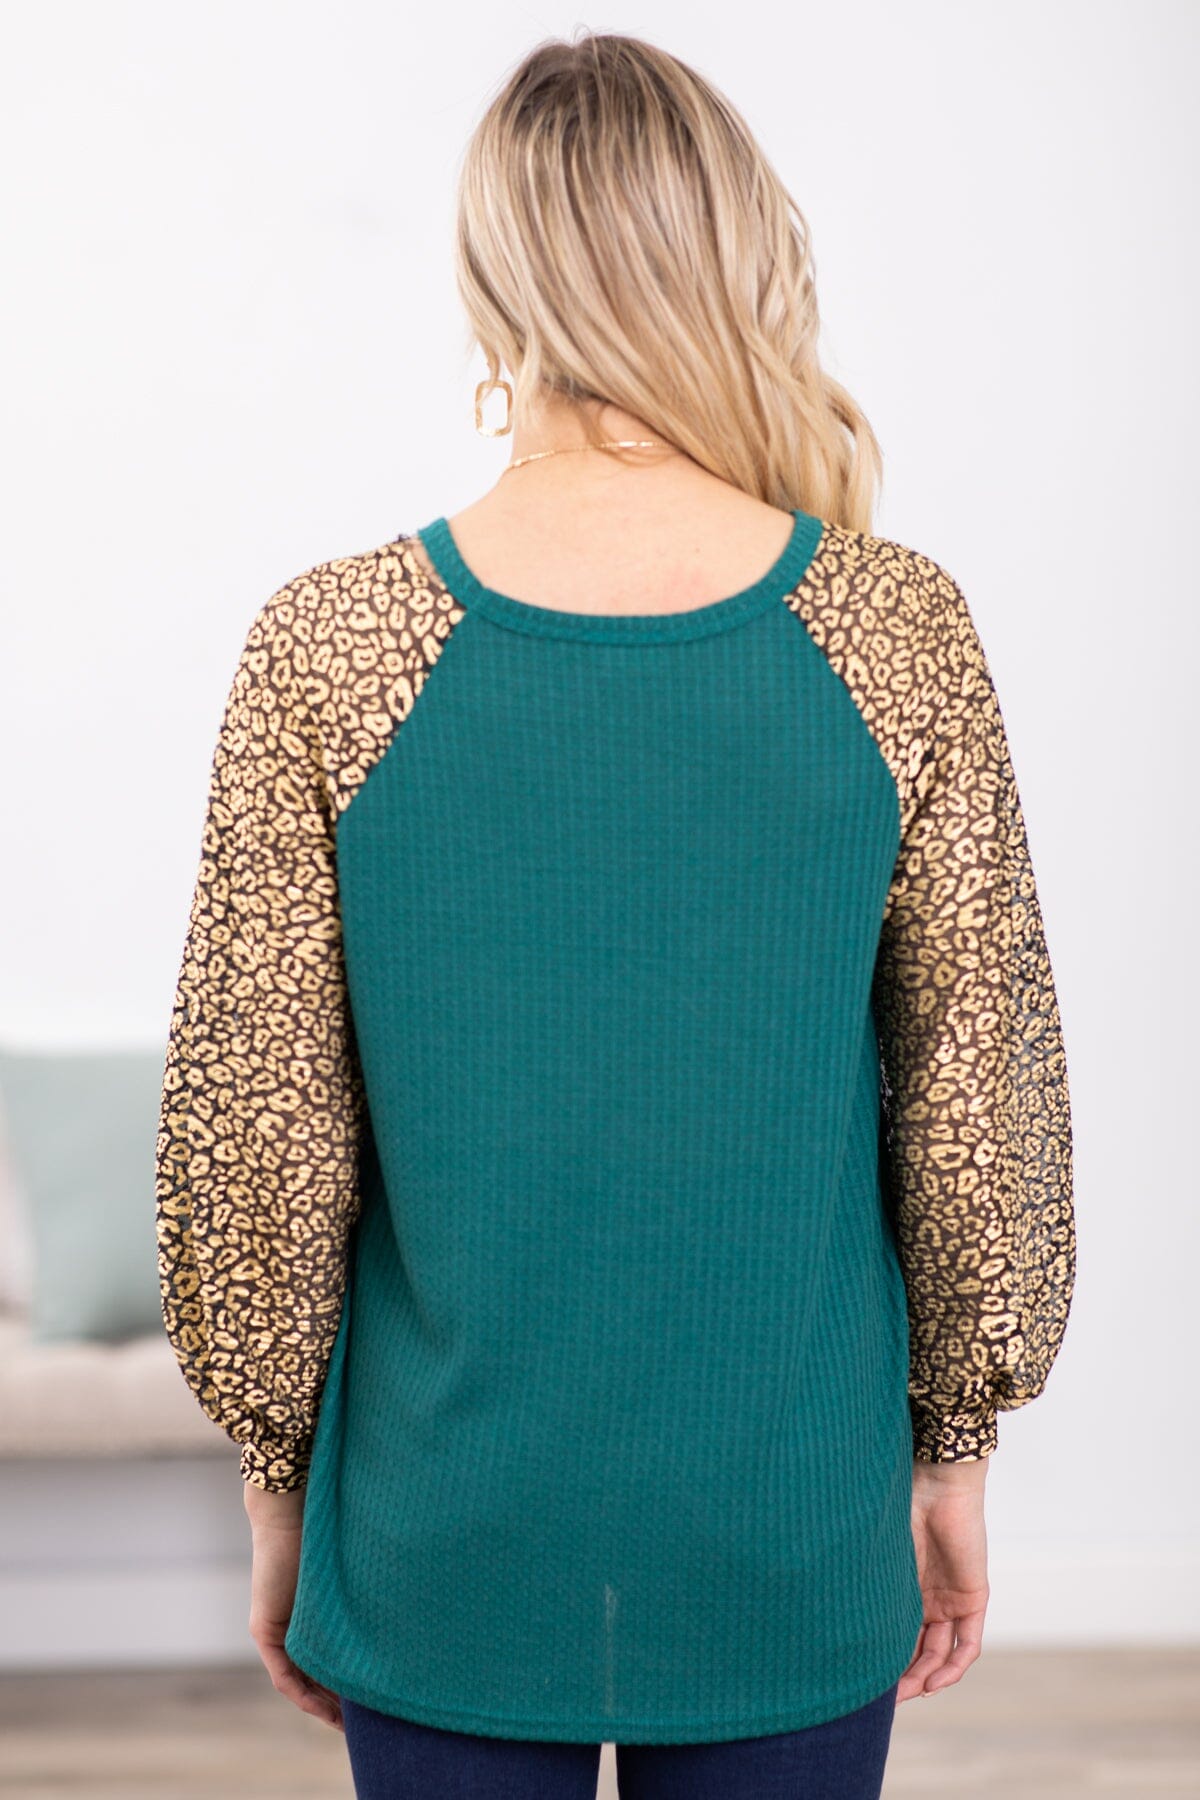 Emerald Green and Gold Animal Print Sleeve Top - Filly Flair